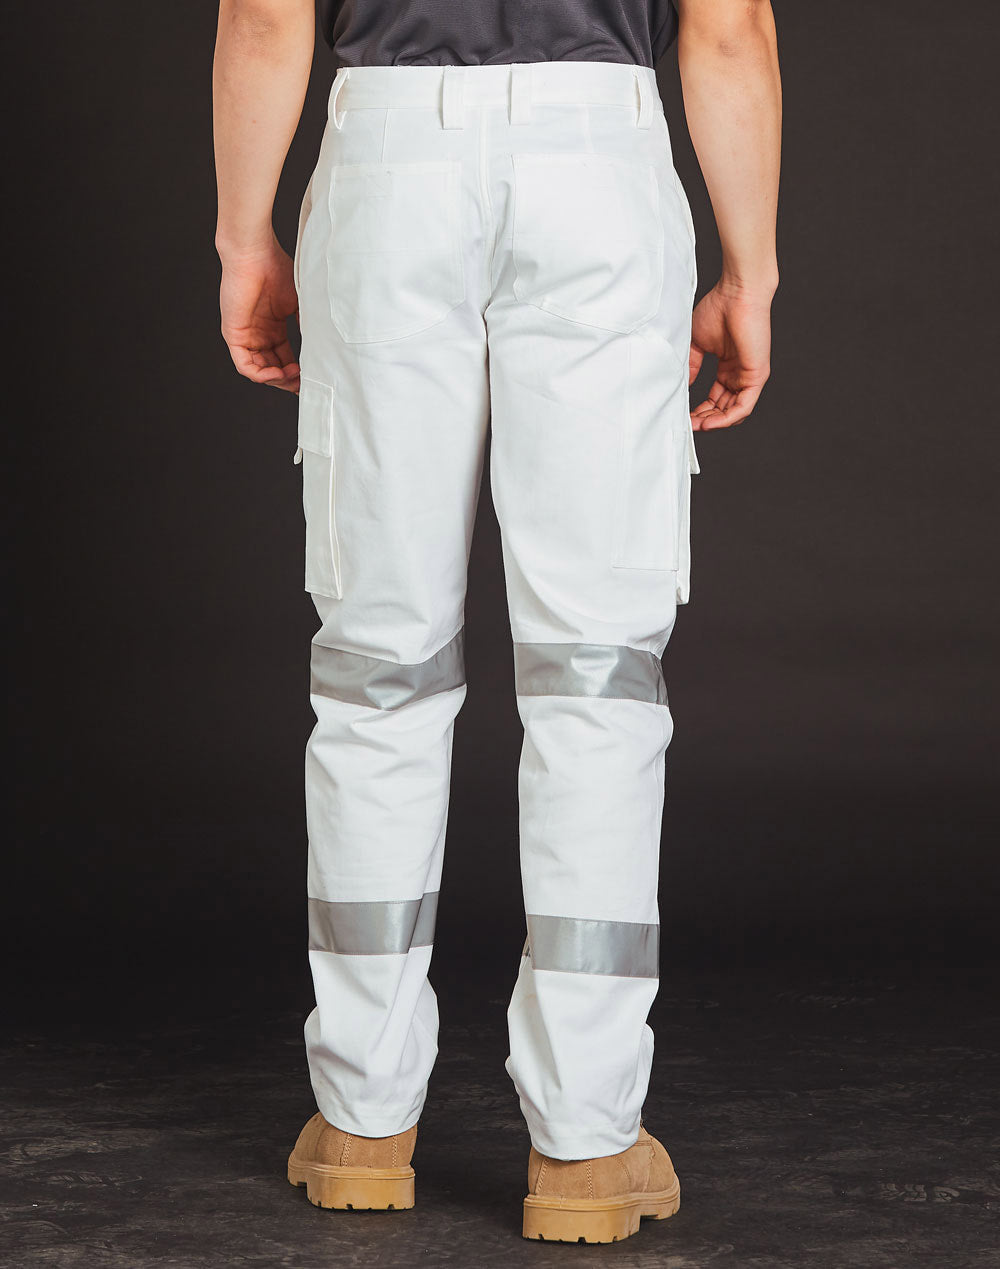 AIW WP18HV Mens White Safety pants with Biomotion Tape Configuration